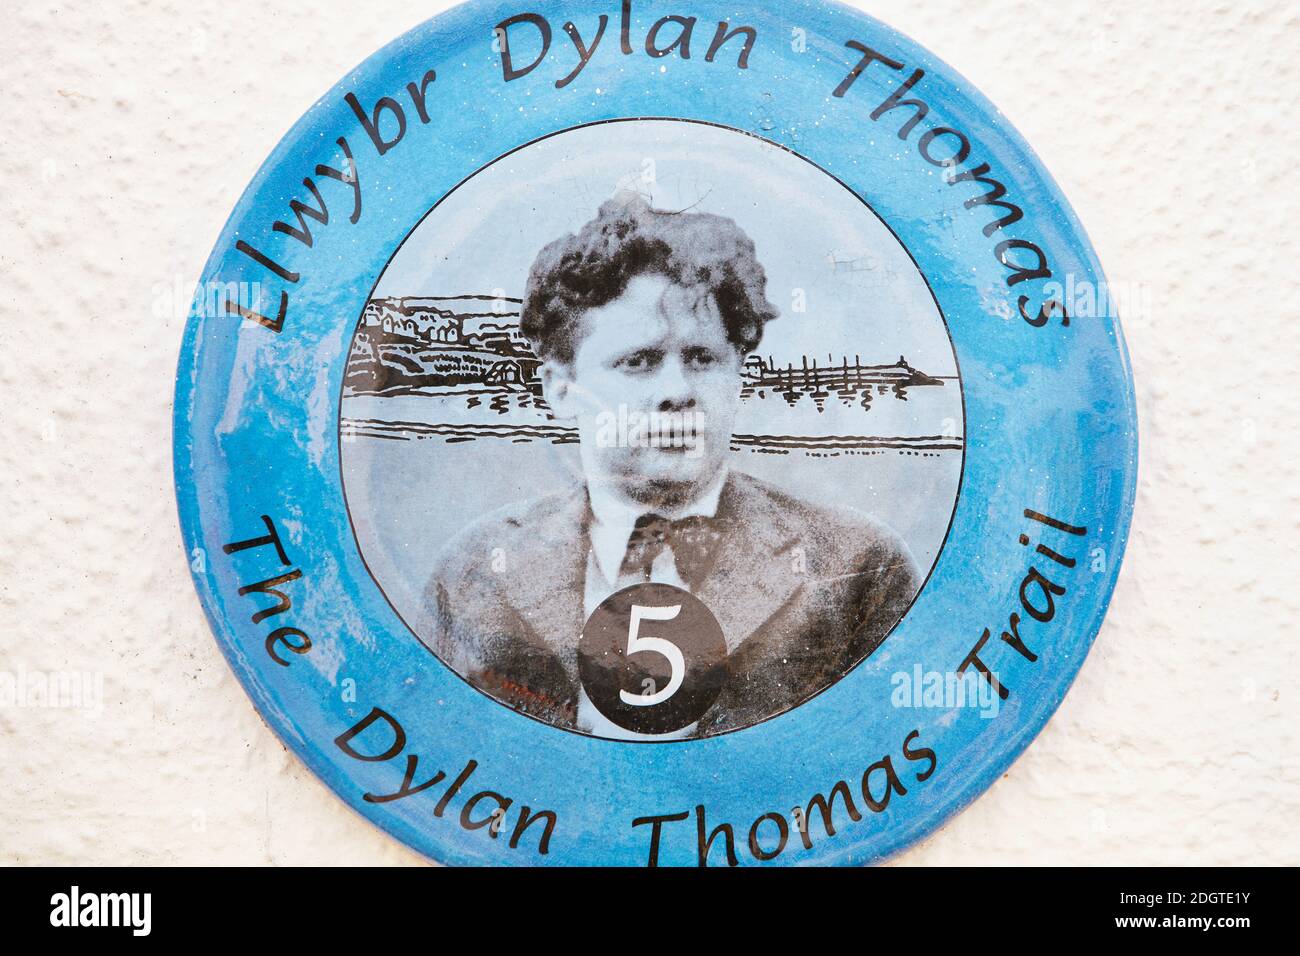 Blue wall plaque marking the Dylan Thomas Trail in New Quay, Ceredigion, Wales, UK Stock Photo